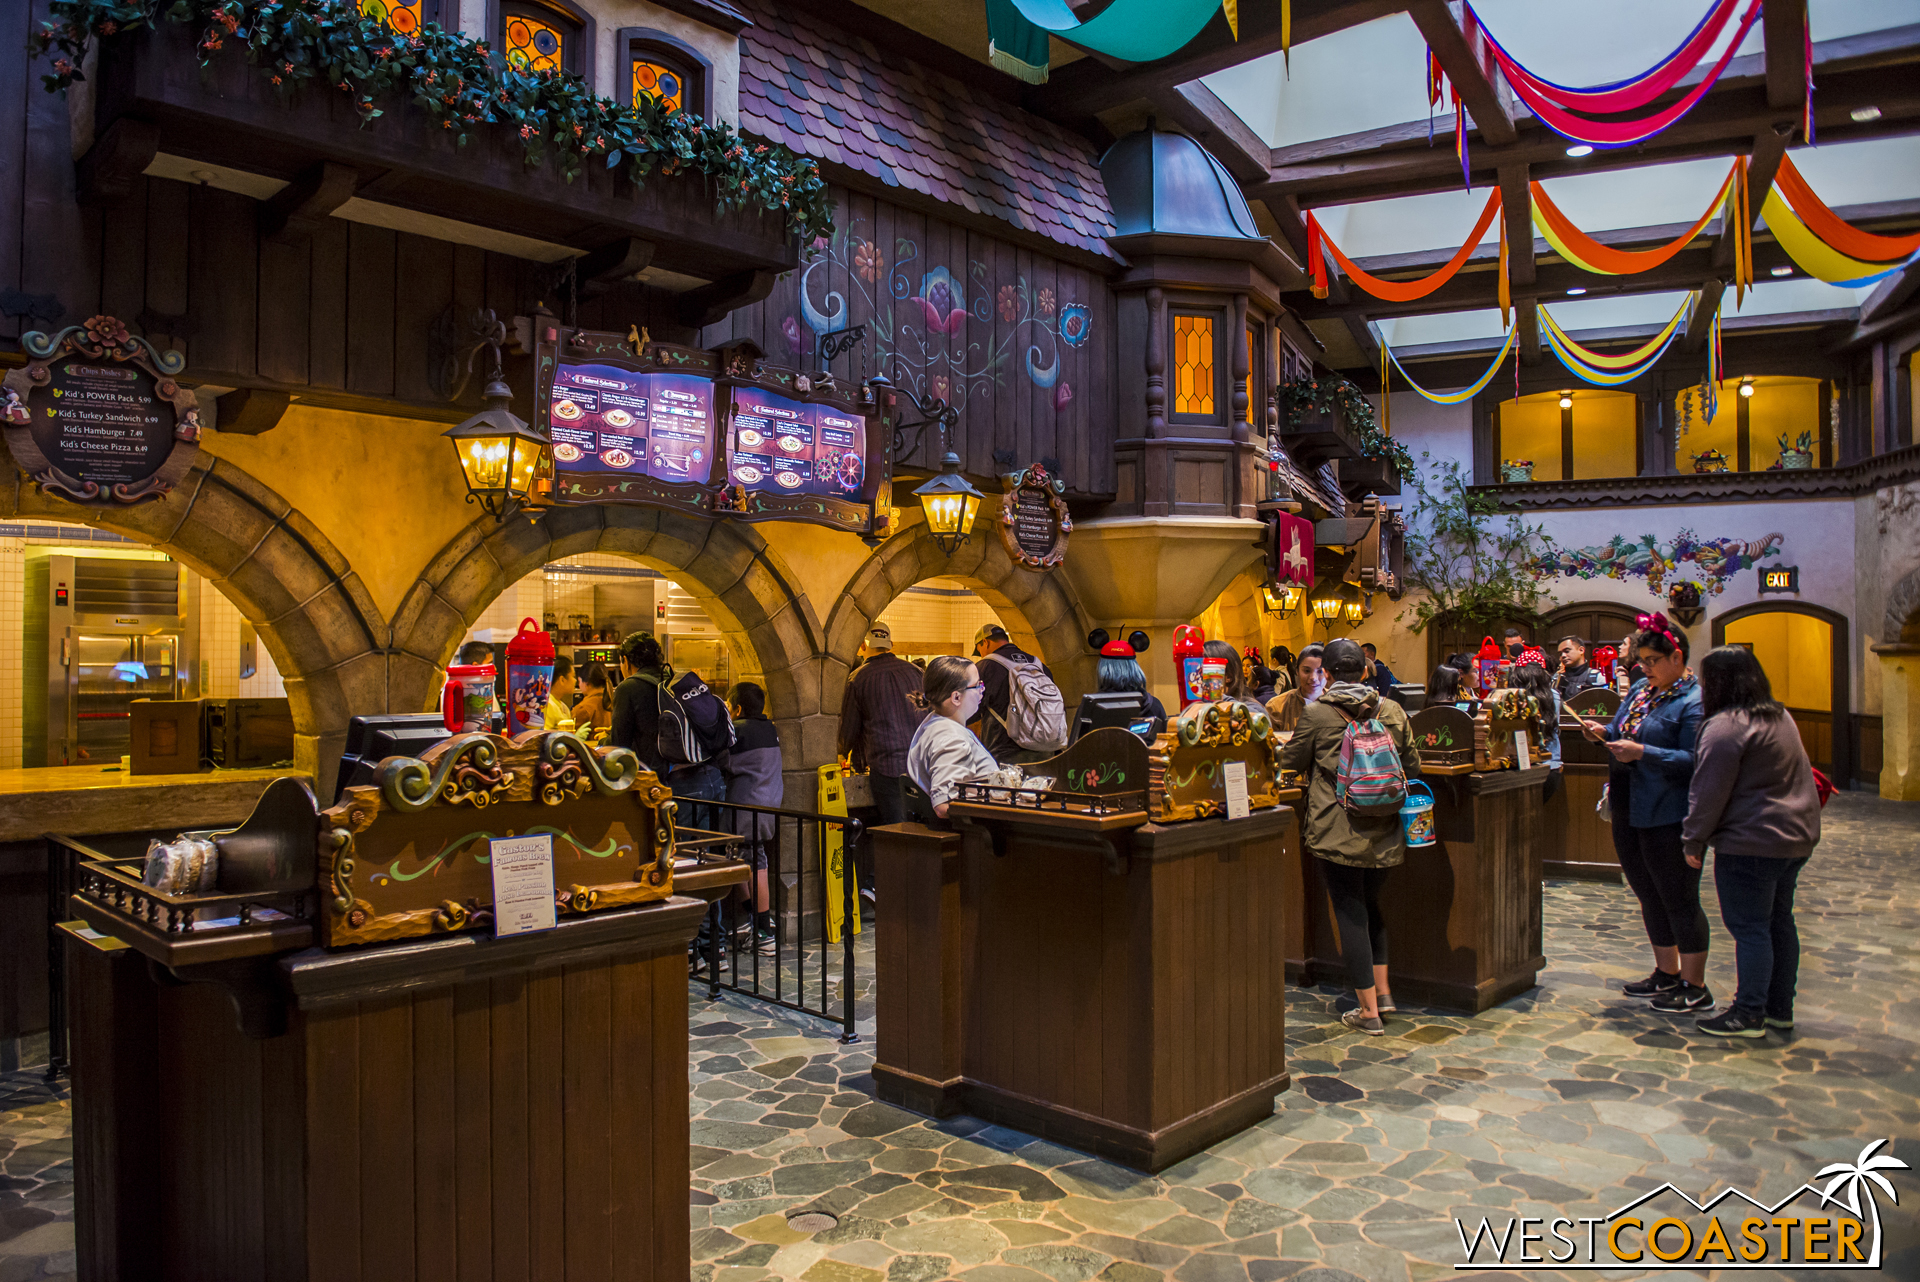  The food counter area is the same, with little details spruced in to distinguish the old  Pinocchio  ambiance from the new  Beauty and the Beast  environment. 